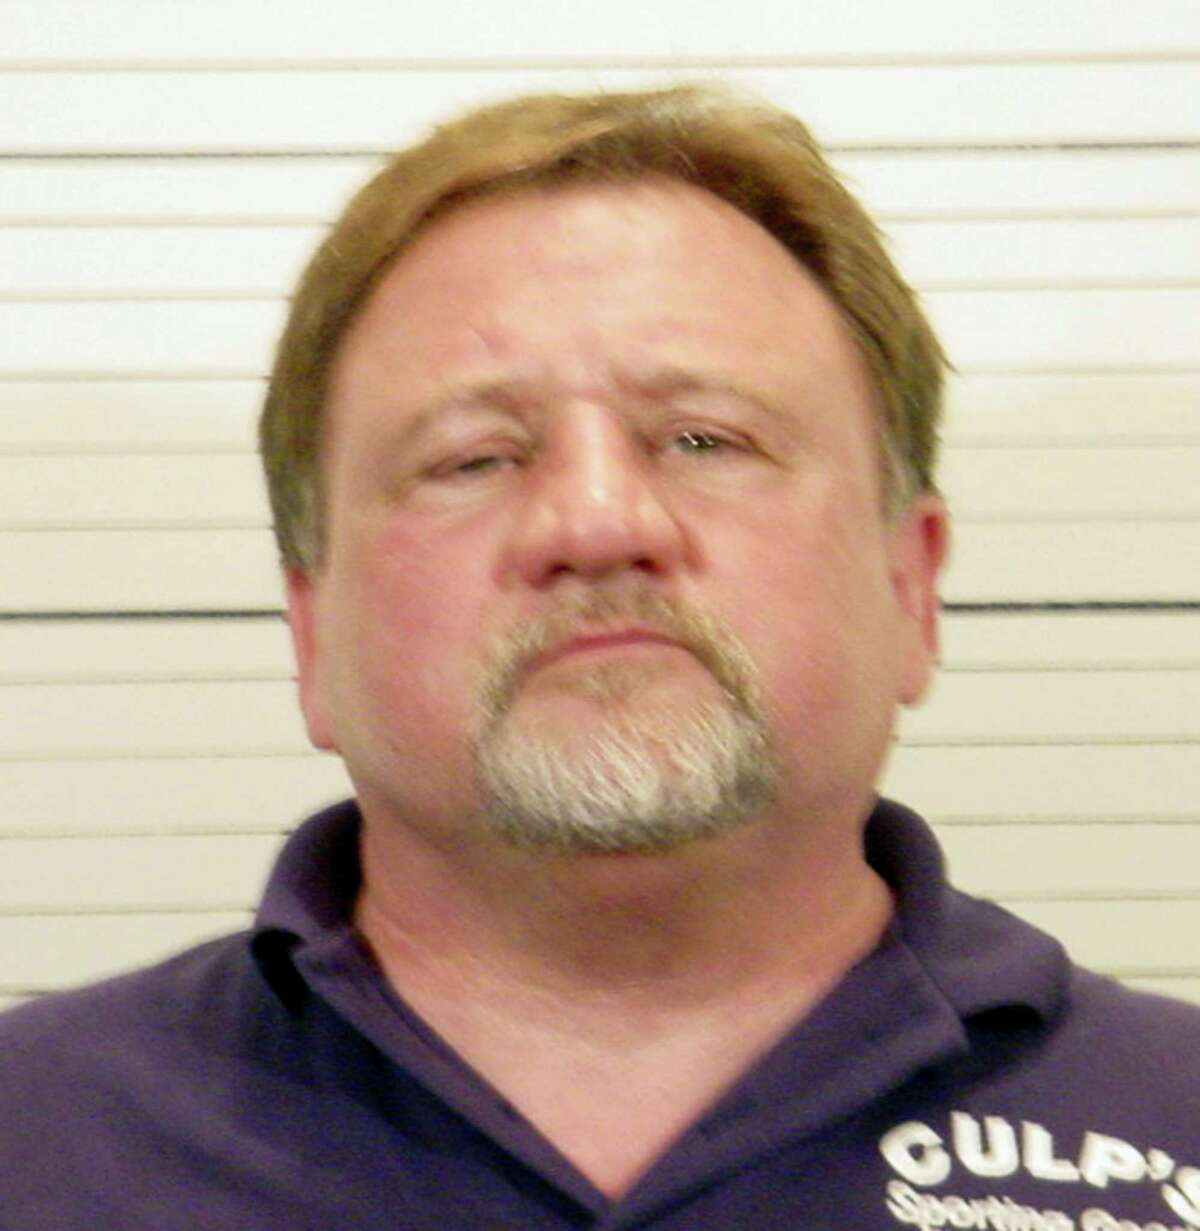 This 2006 photo provided by the St. Clair County, Ill., Sheriff’s Department shows James T. Hodgkinson. Officials said Hodgkinson has been identified as the man who opened fire on Republican lawmakers at a congressional baseball practice Wednesday June 14, 2017, in Alexandria, Va.